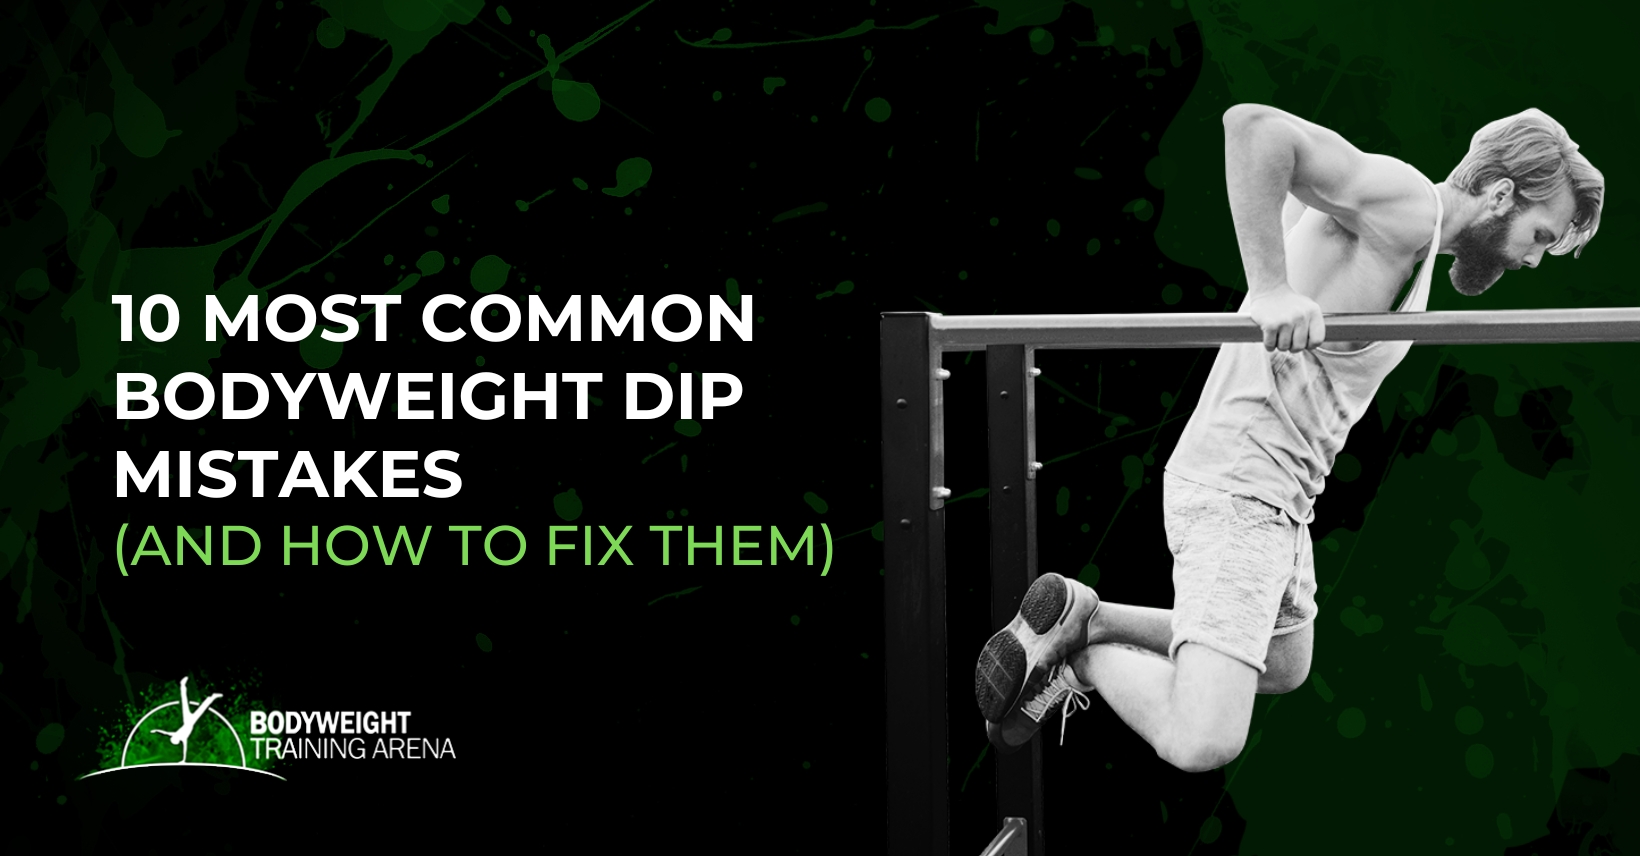 10 Most Common Bodyweight Dip Mistakes (And How to Fix Them)